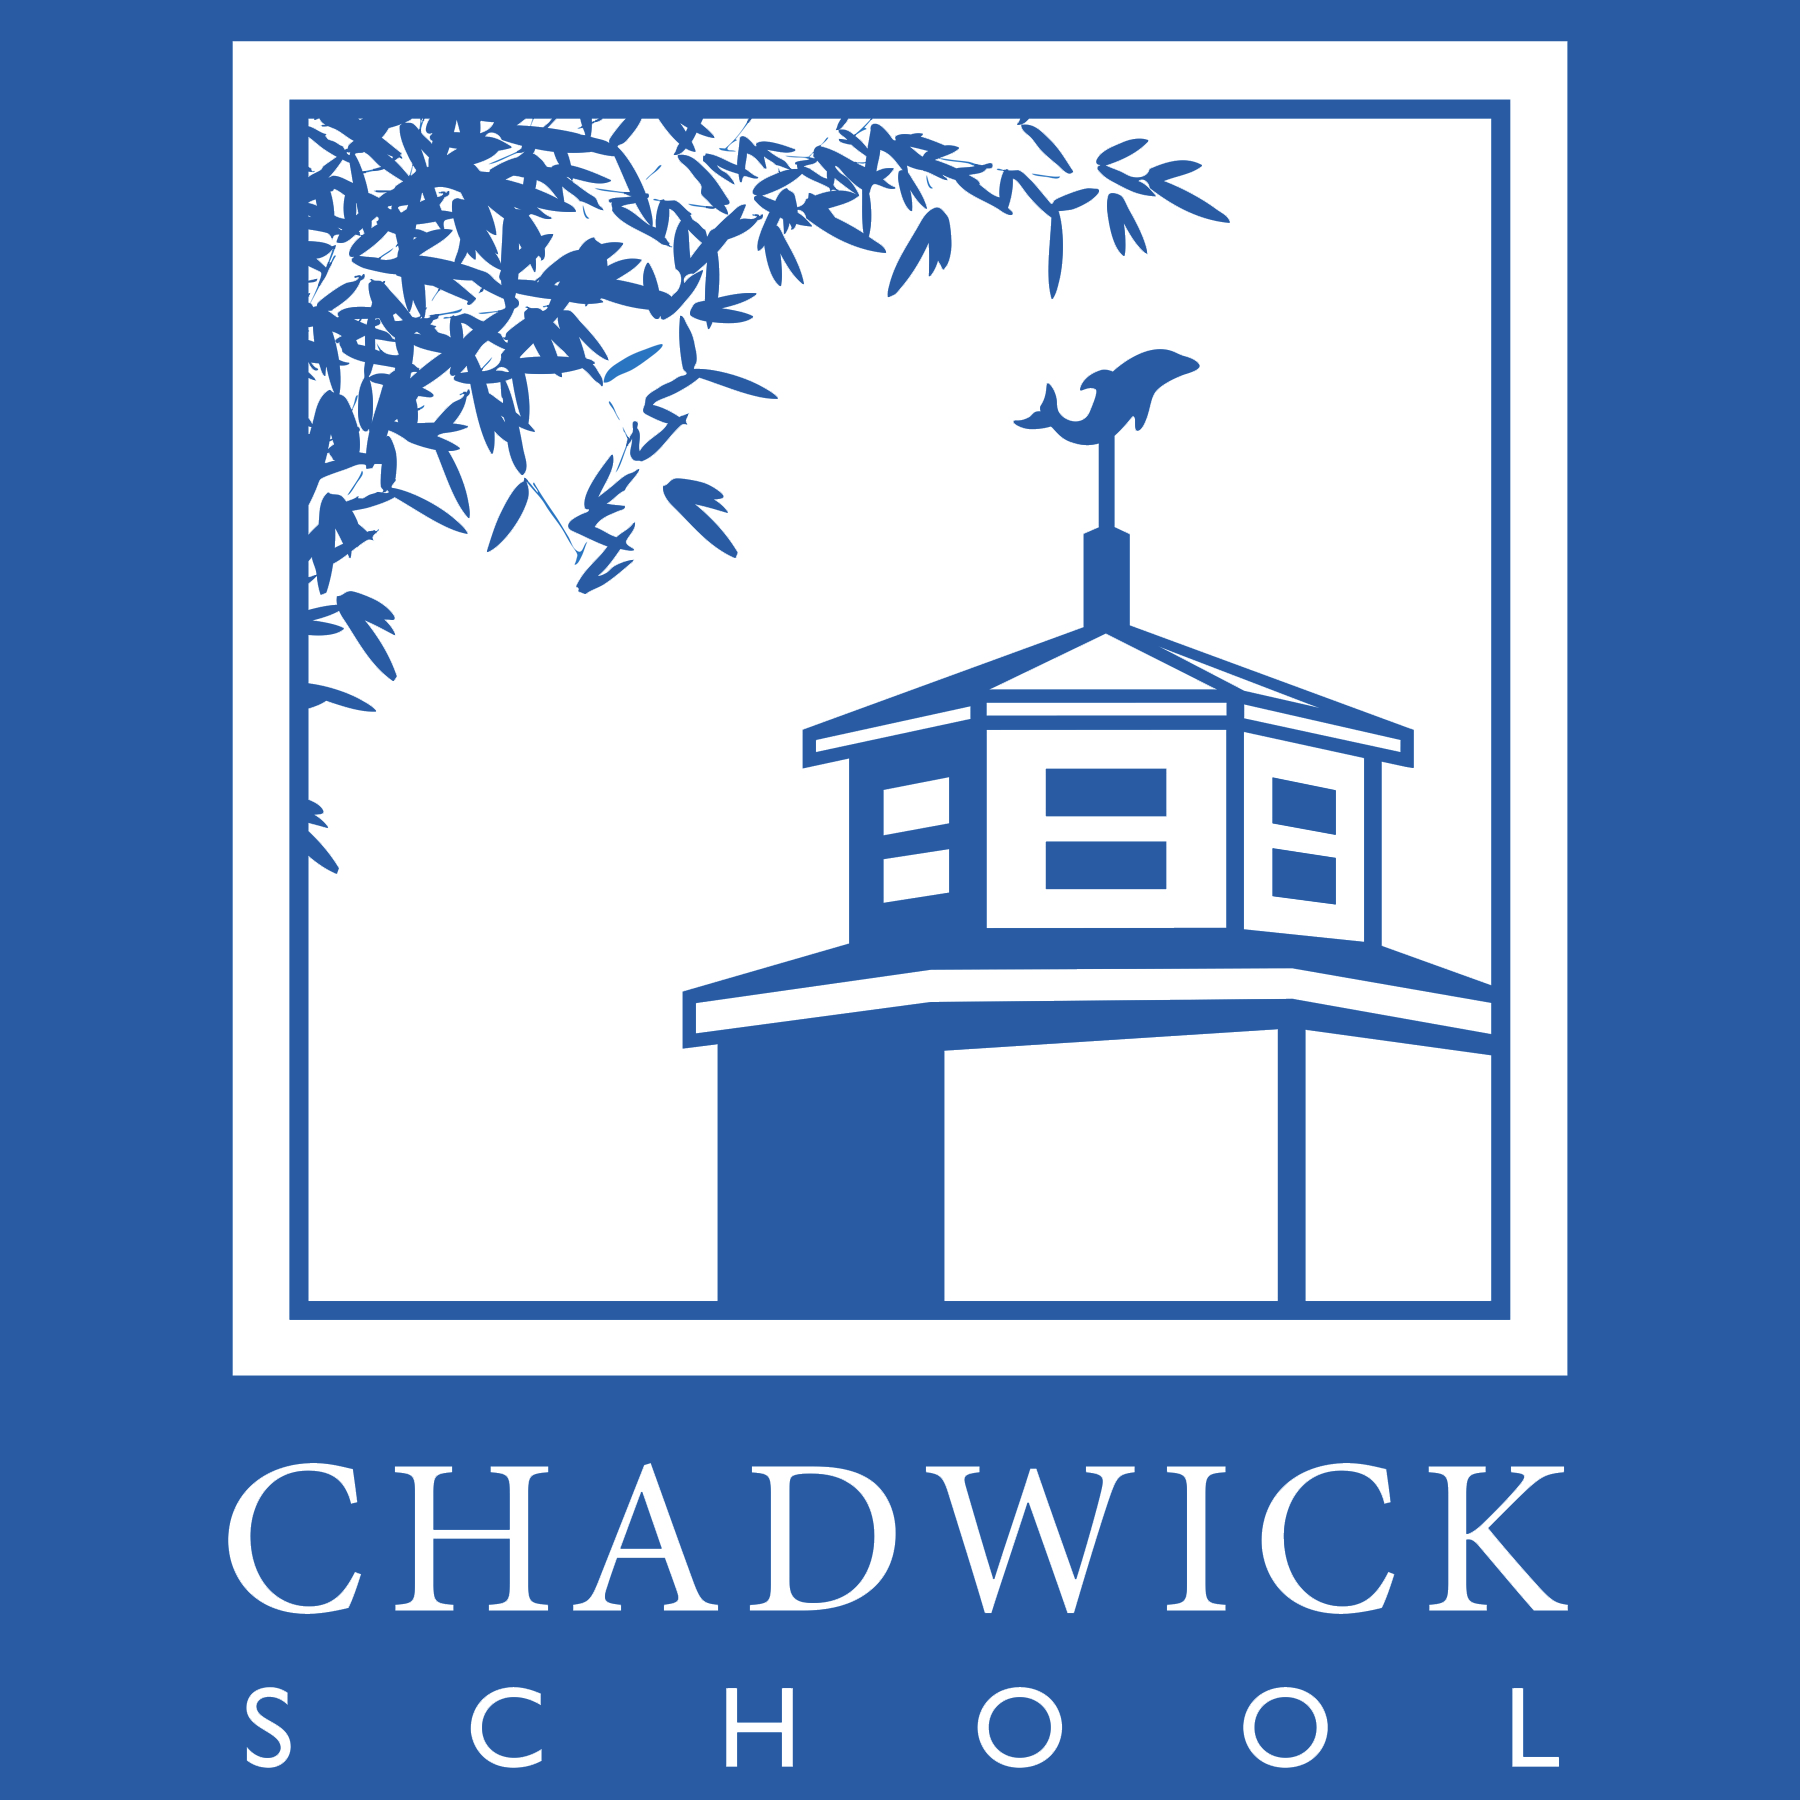 Psychologist & Director of Student Support, Chadwick School